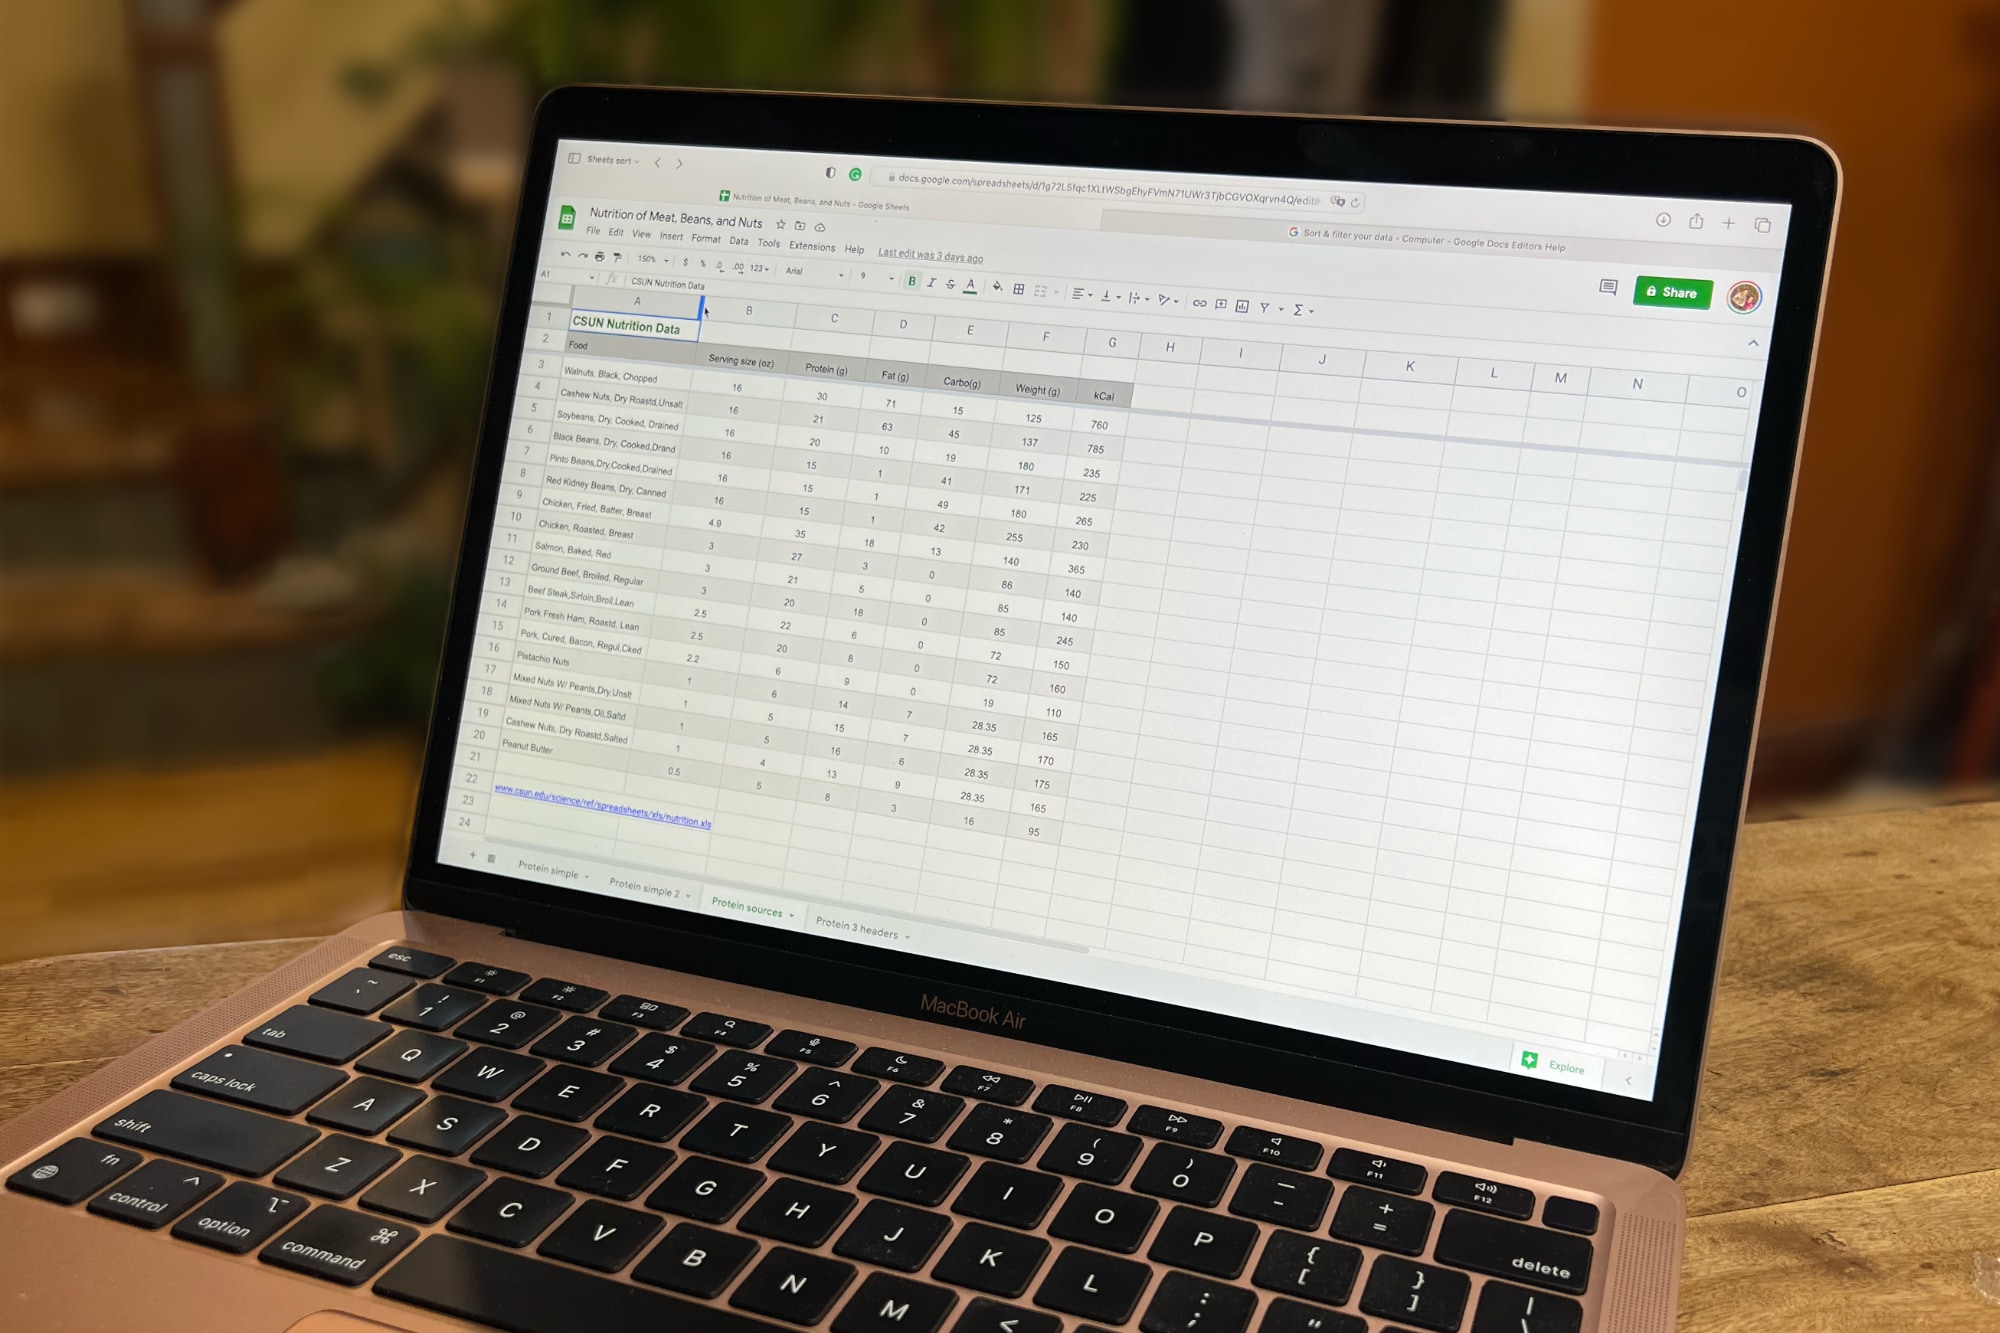 Google Sheets is open in the Safari browser on a MacBook Air.